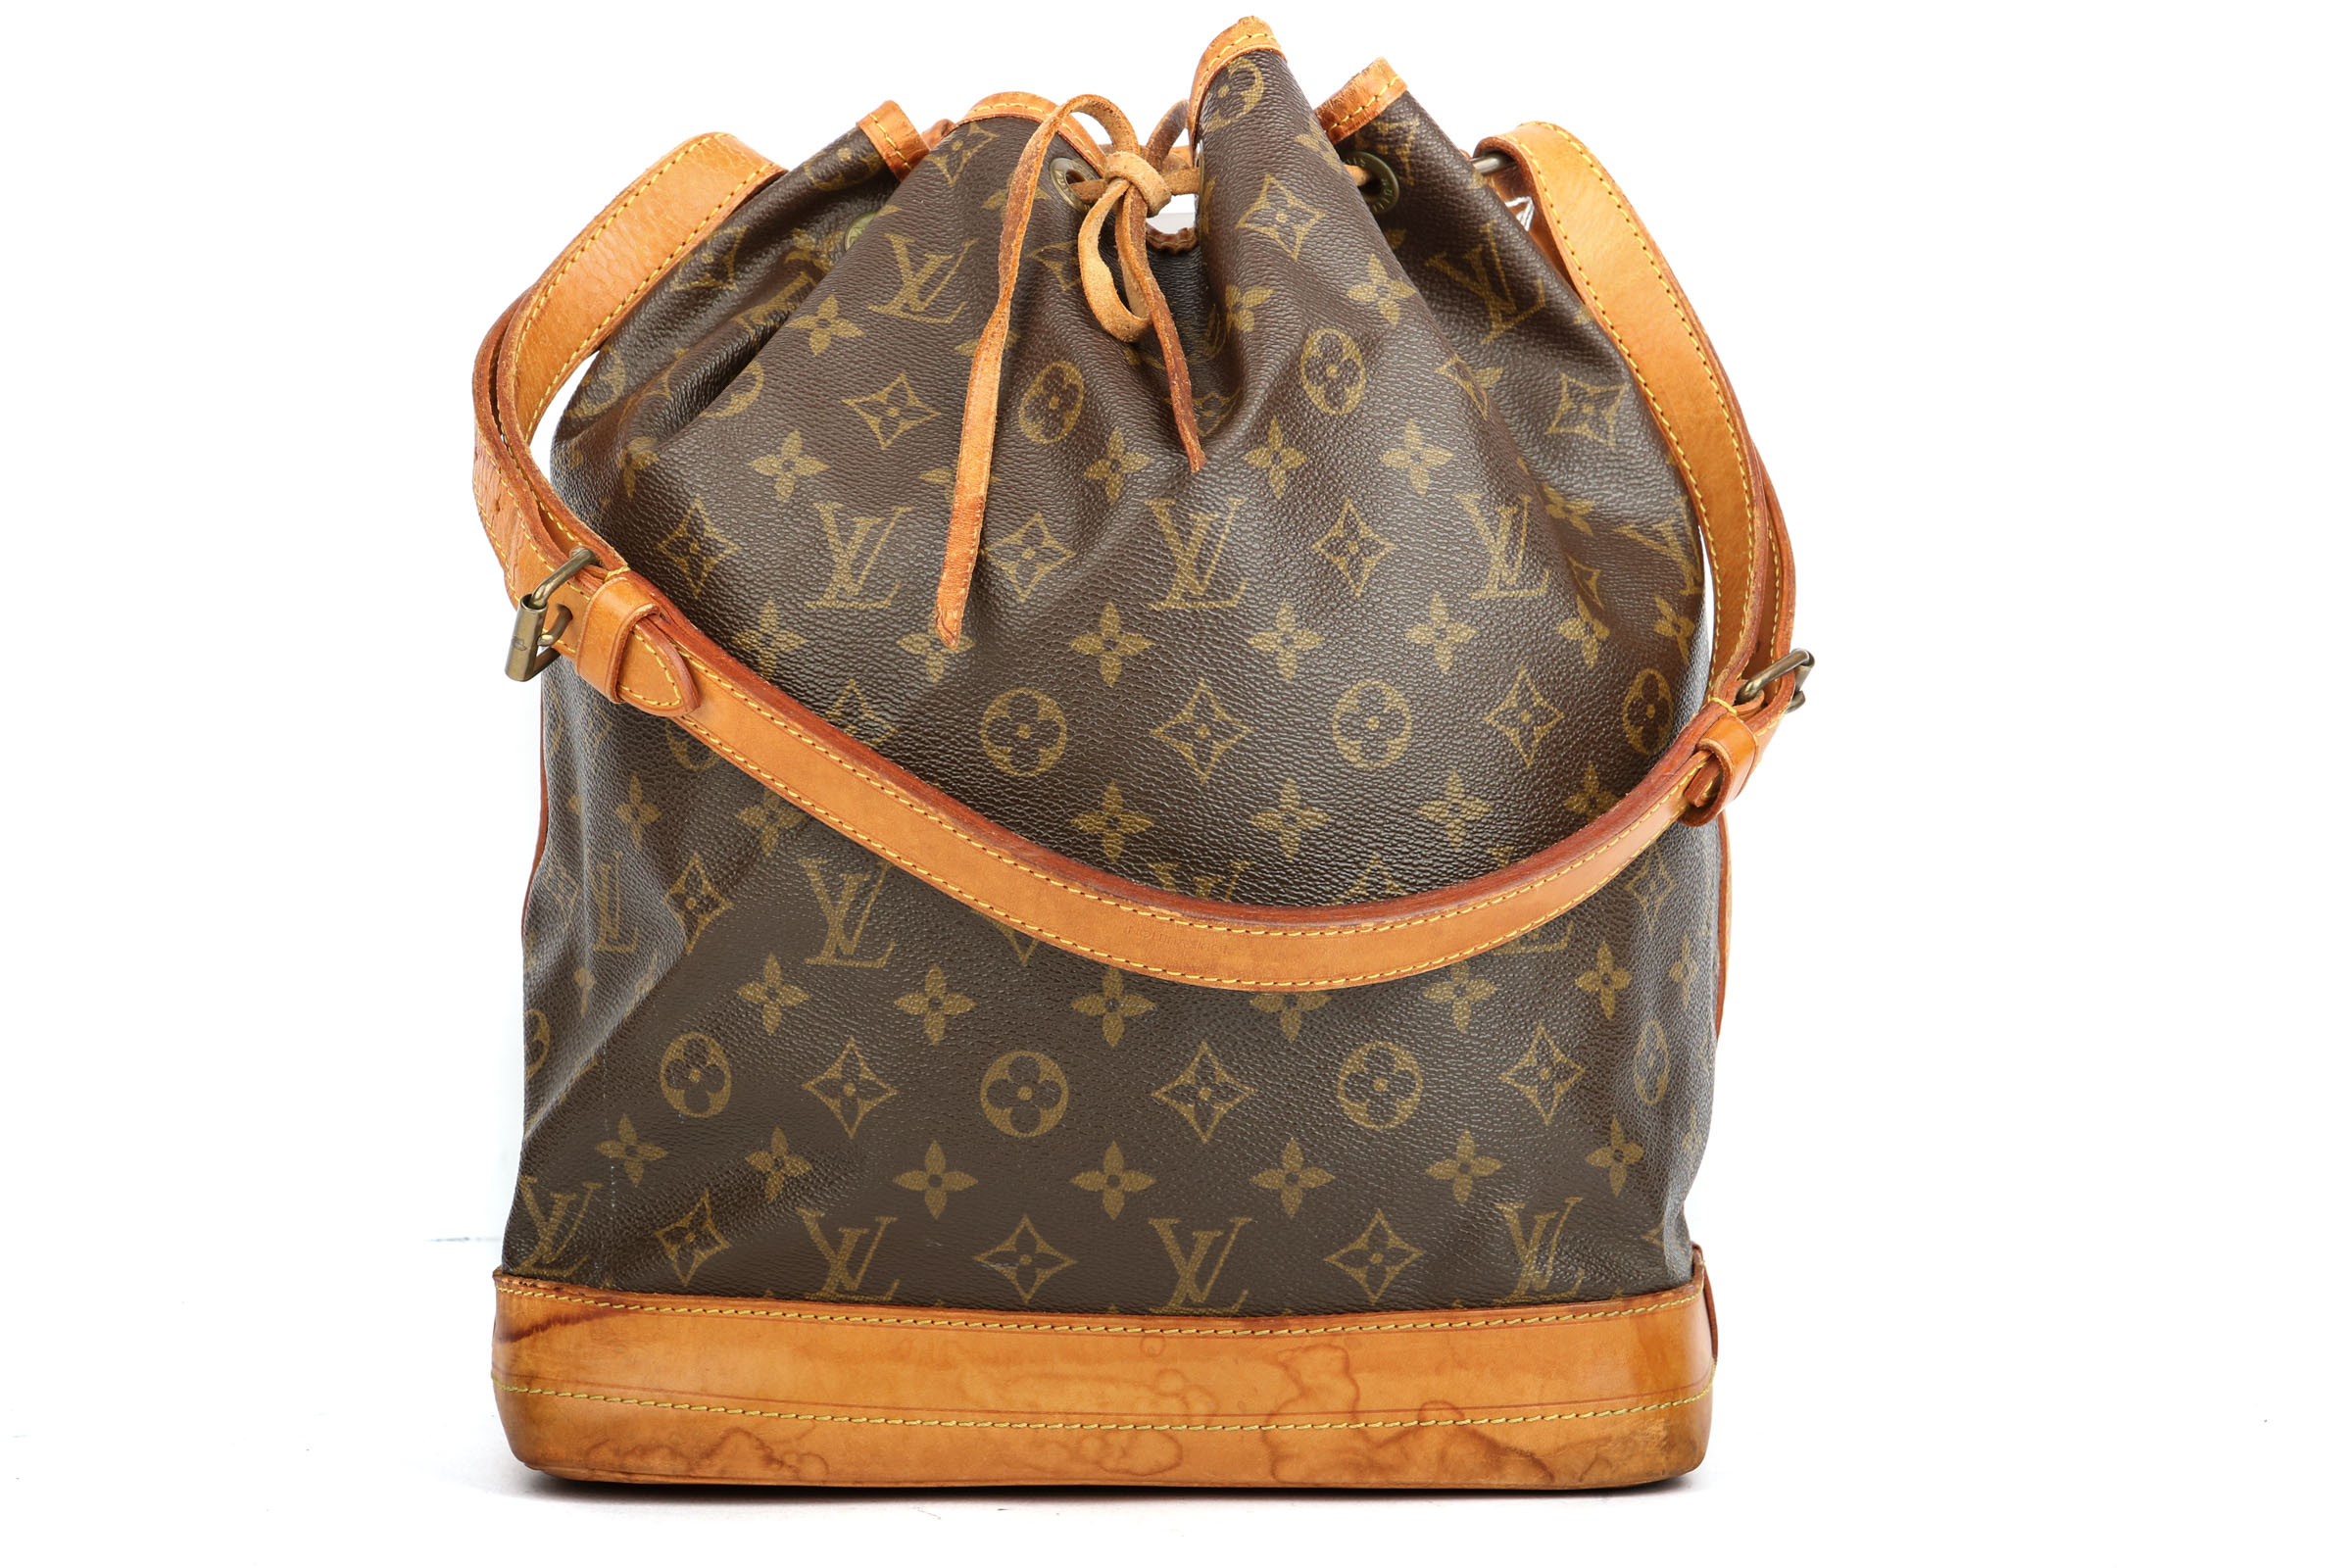 Louis Vuitton Trevi Satchels - Up to 70% off at Tradesy